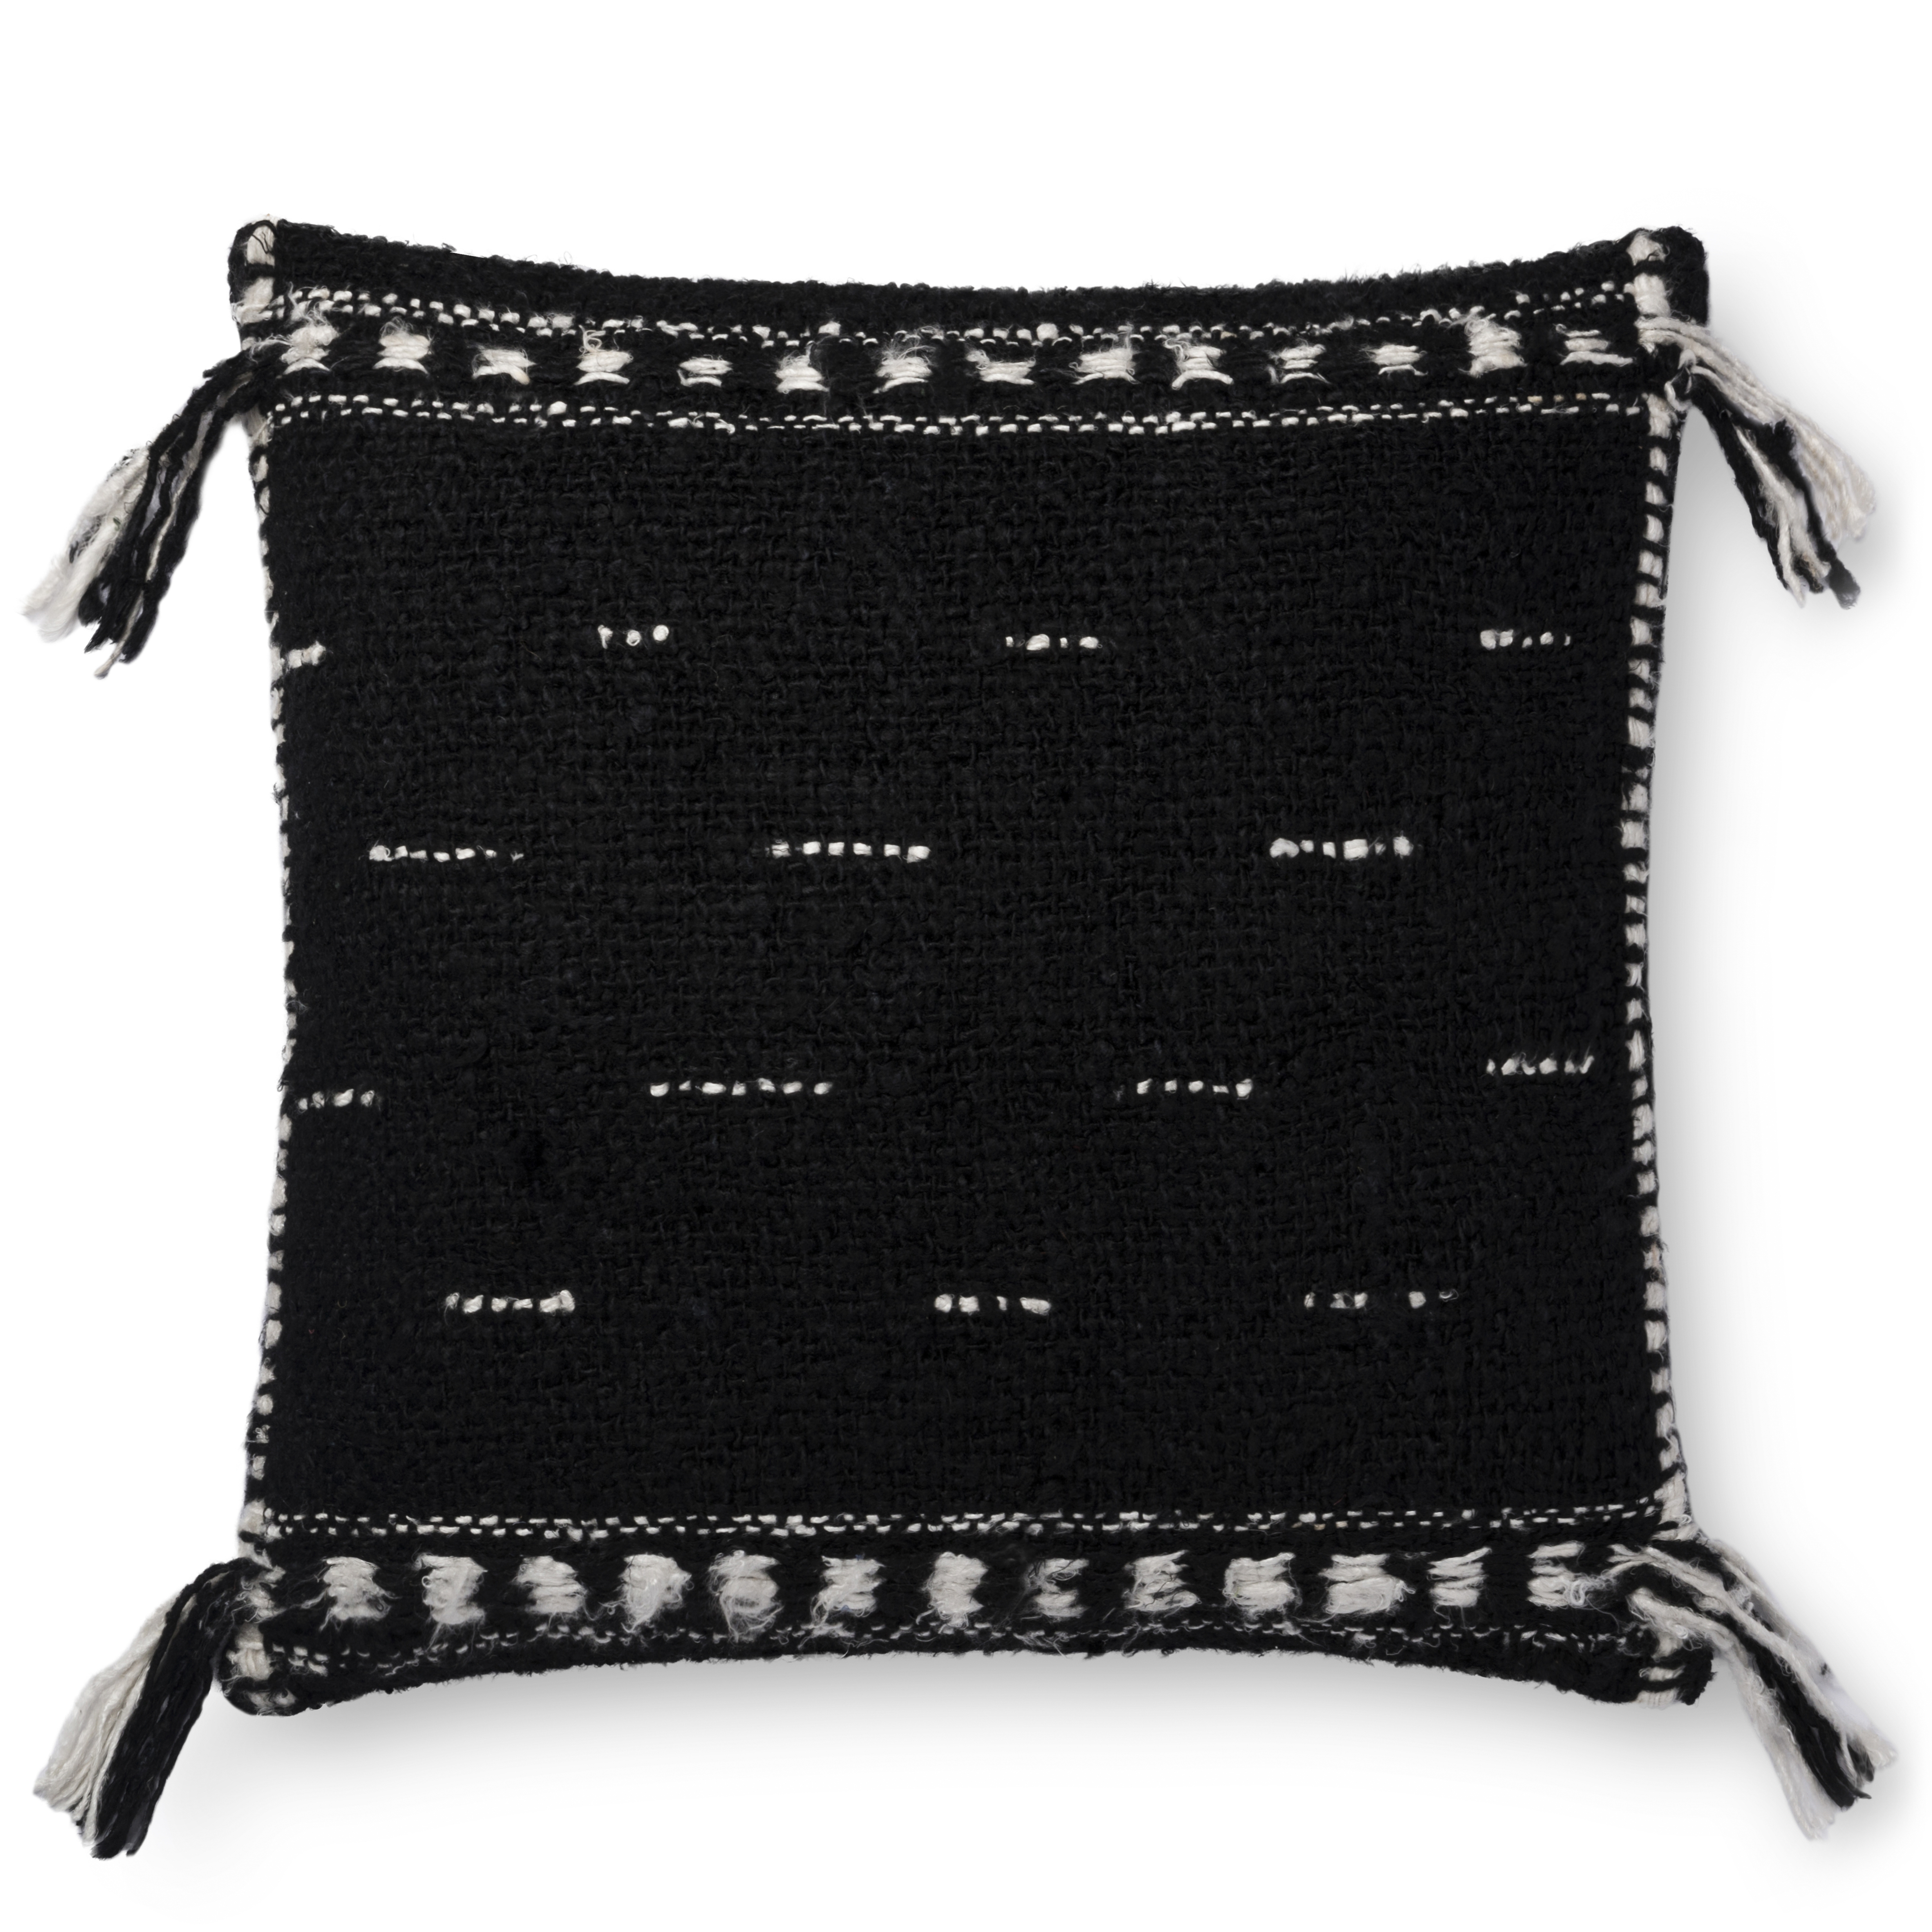 Justina Blakeney x Loloi PILLOWS P0661 Black 22" x 22" Cover Only - Loloi Rugs